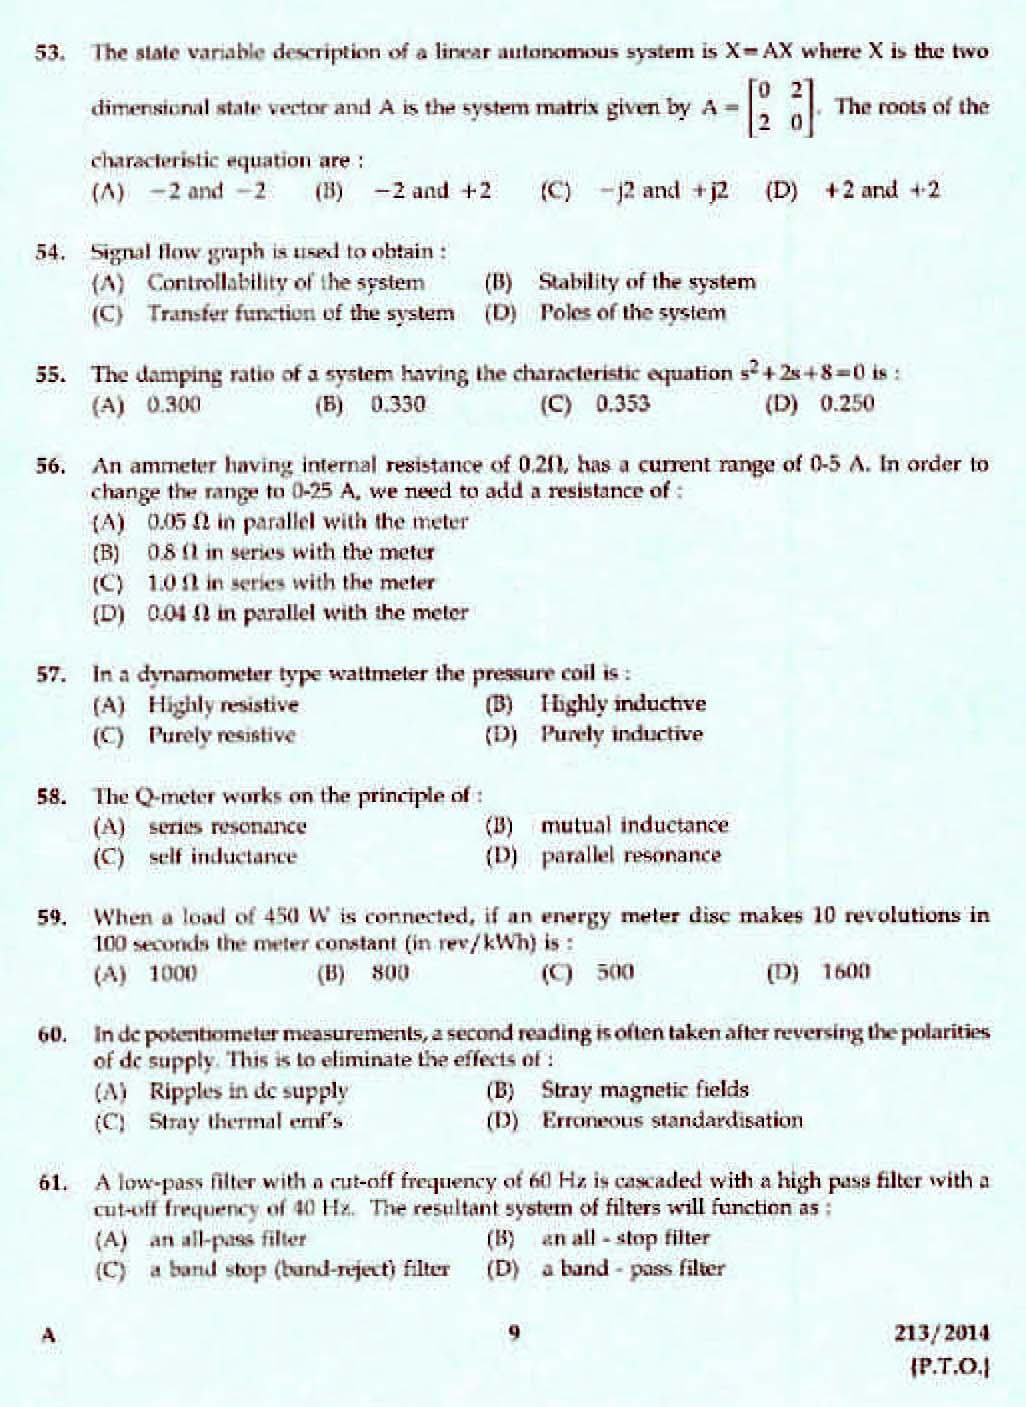 Kerala PSC Assistant Engineer Electrical Exam 2014 Question Paper Code 2132014 7